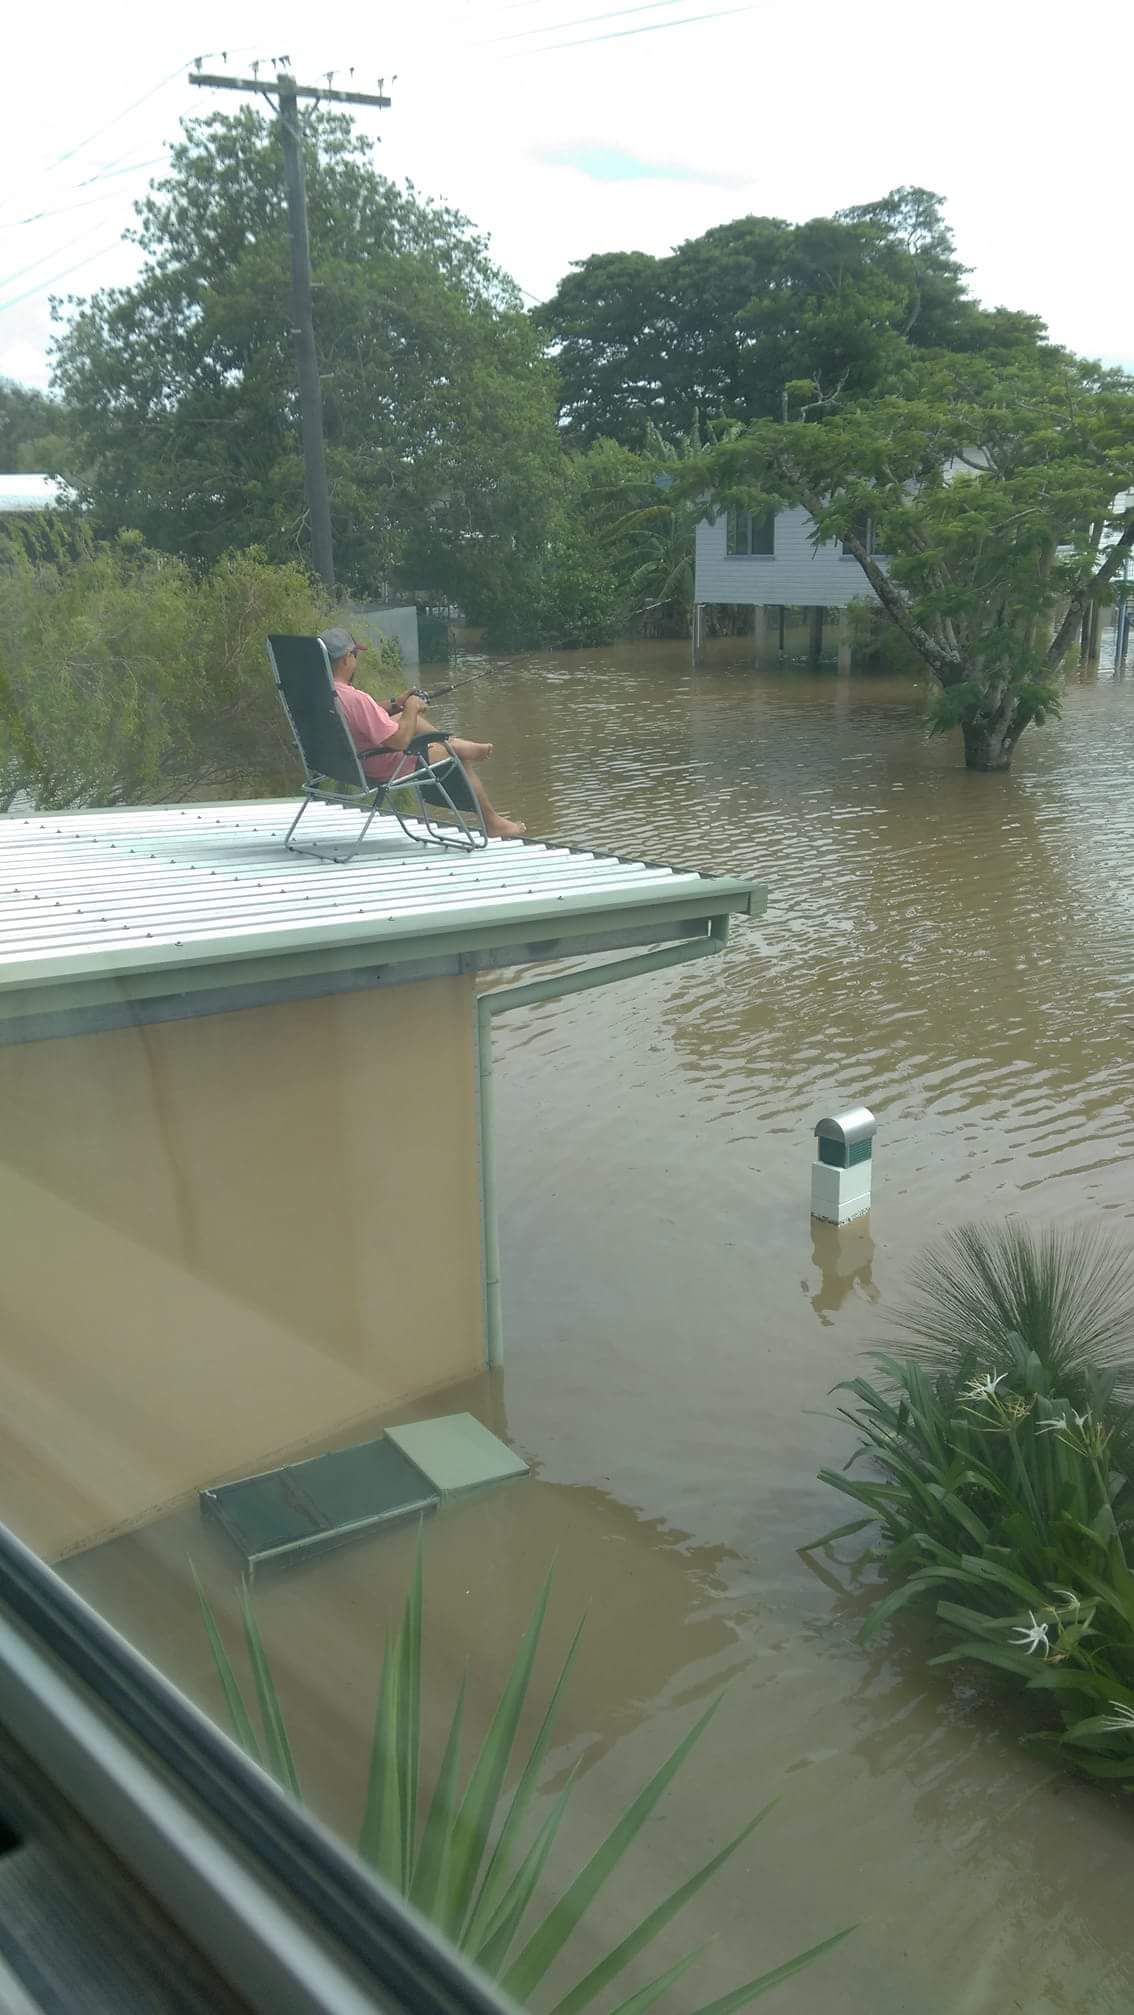 Another legend during Australian Floods, just fishing